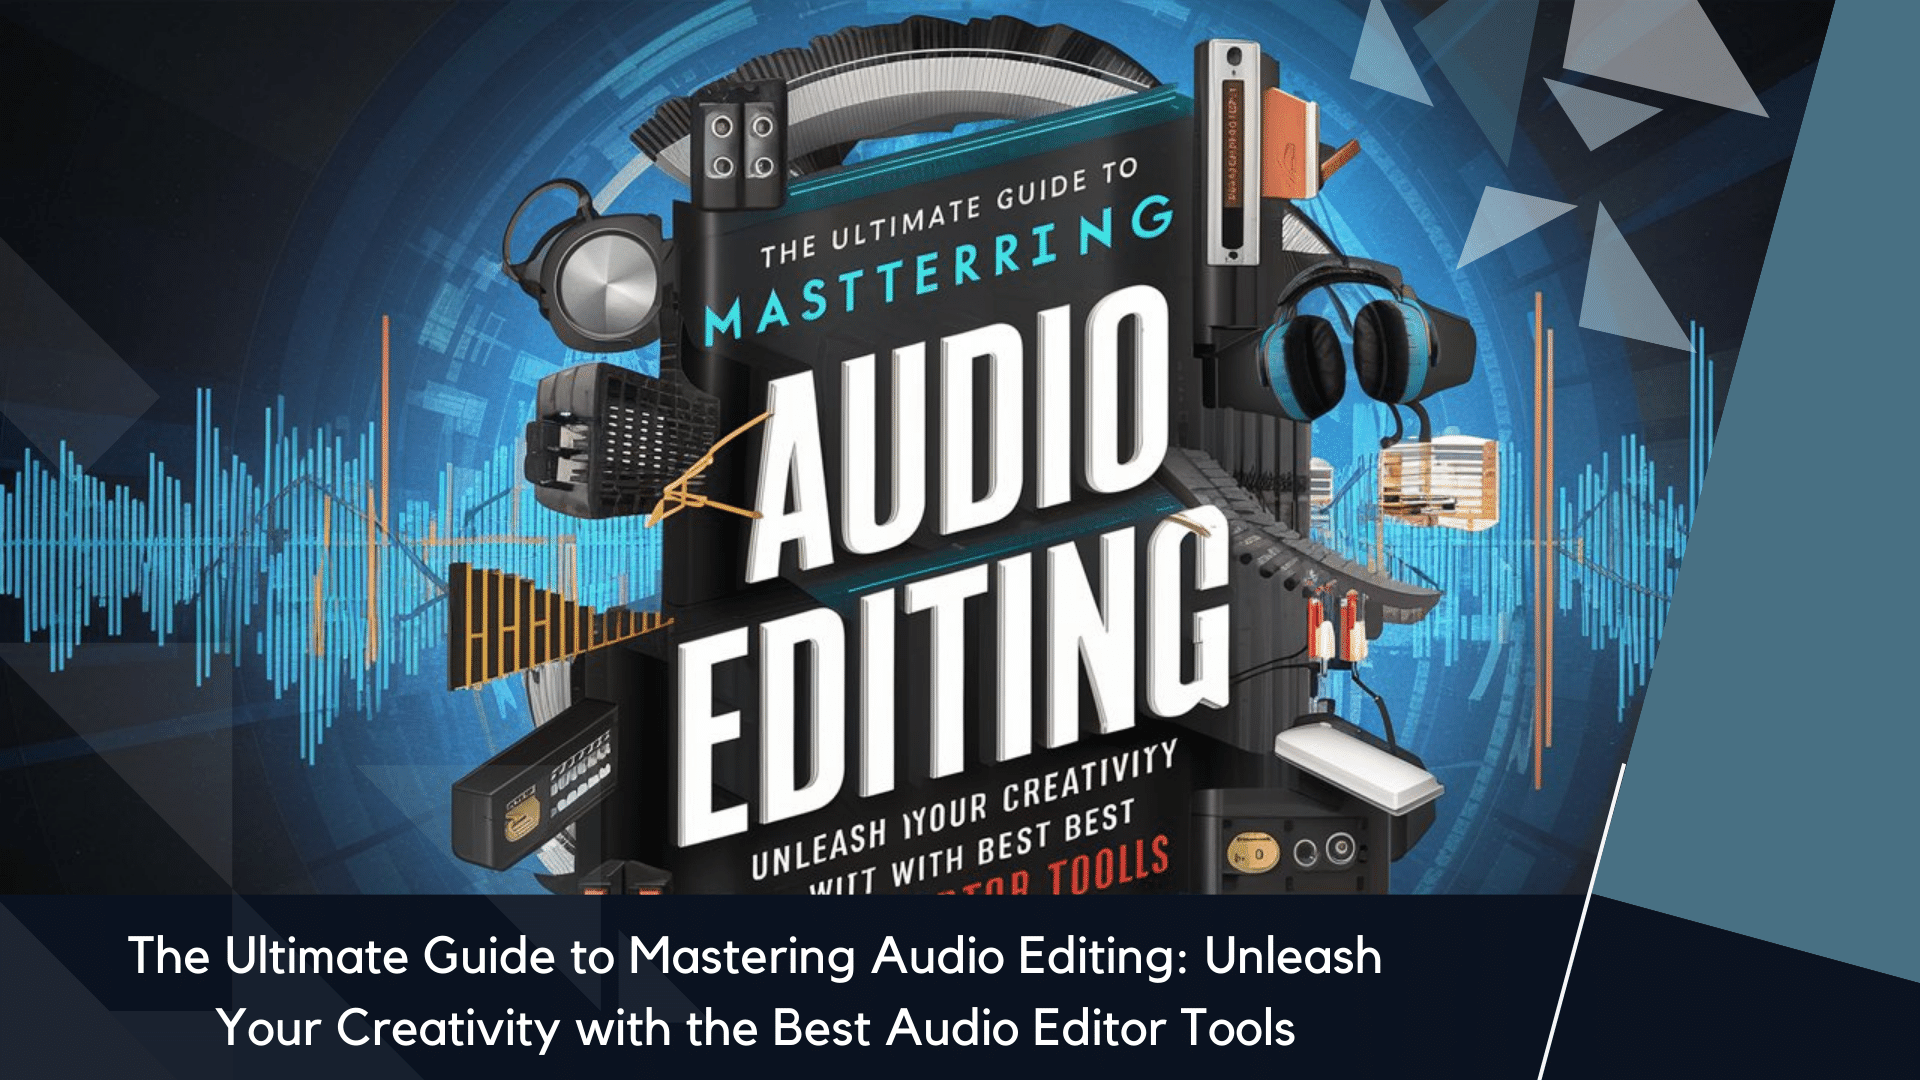 The Ultimate Guide to Mastering Audio Editing Unleash Your Creativity with the Best Audio Editor Tools